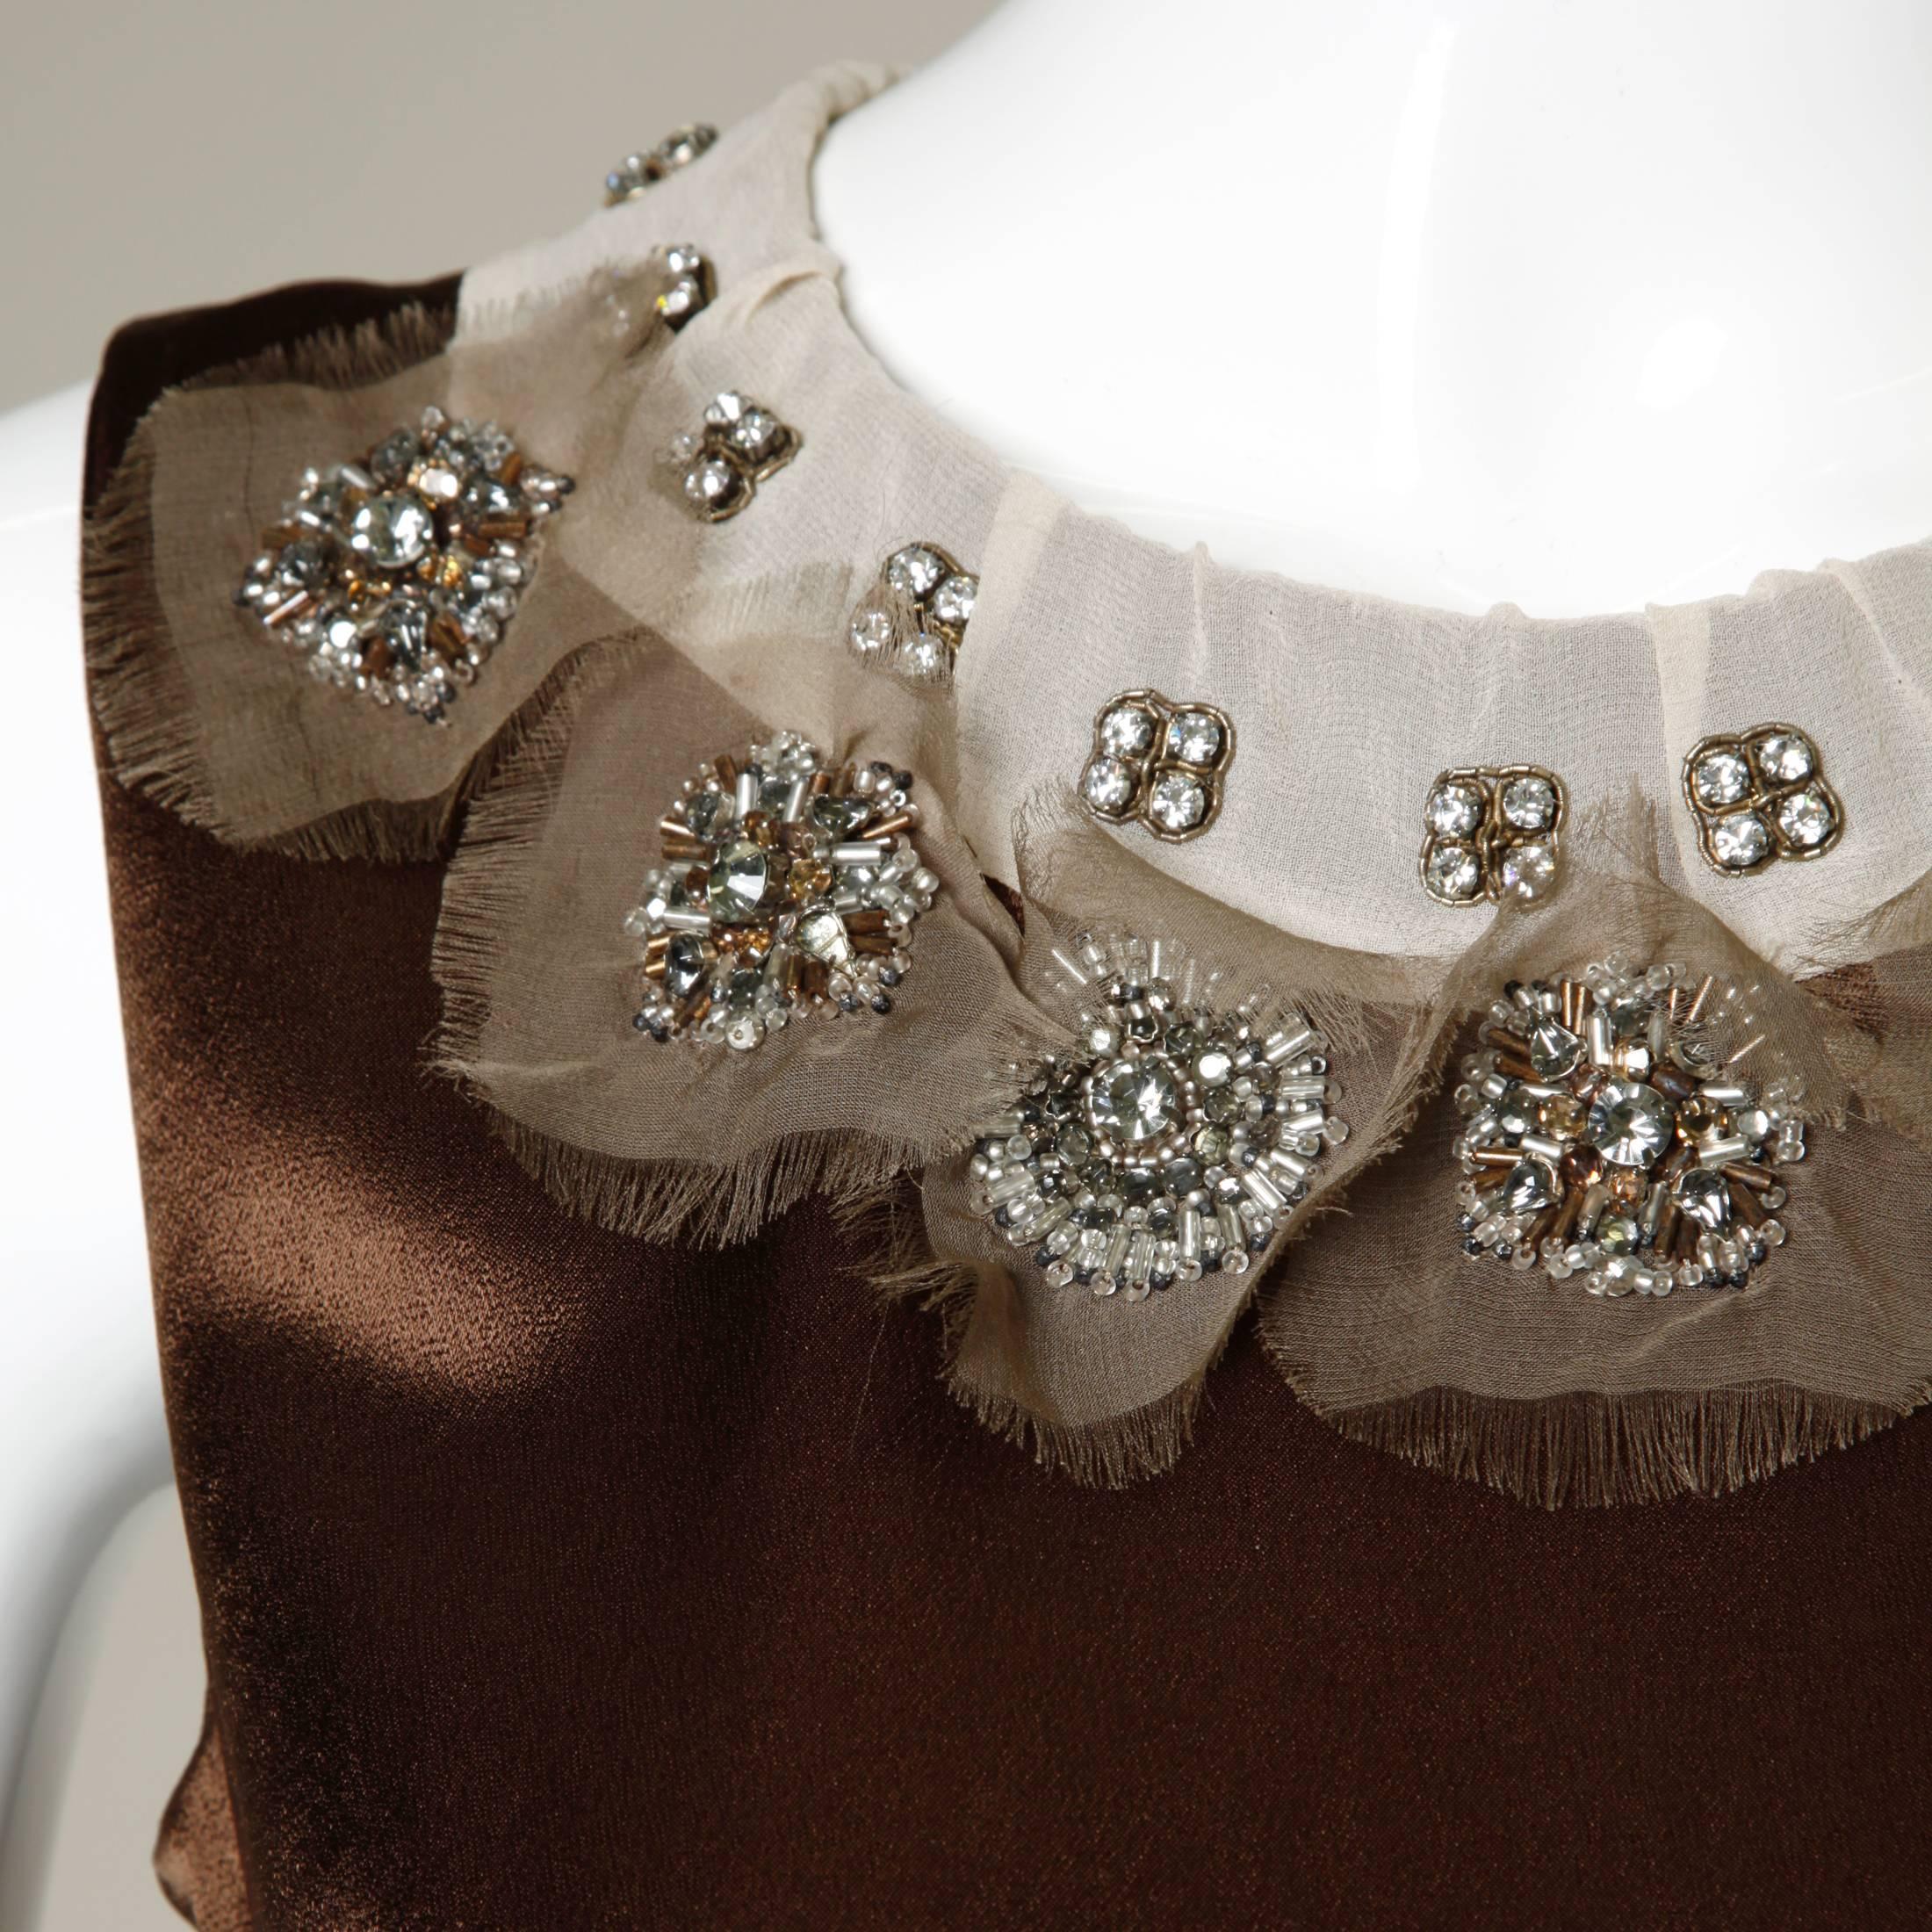 Gorgeous brown silk sleeveless top with a stunning neutral silk collar. The top is embellished with Swarovski crystal rhinestones and glass beadwork. Beautiful!

Details:

Unlined
Back Metal Zip Closure
Marked Size: T34
Estimated Size: